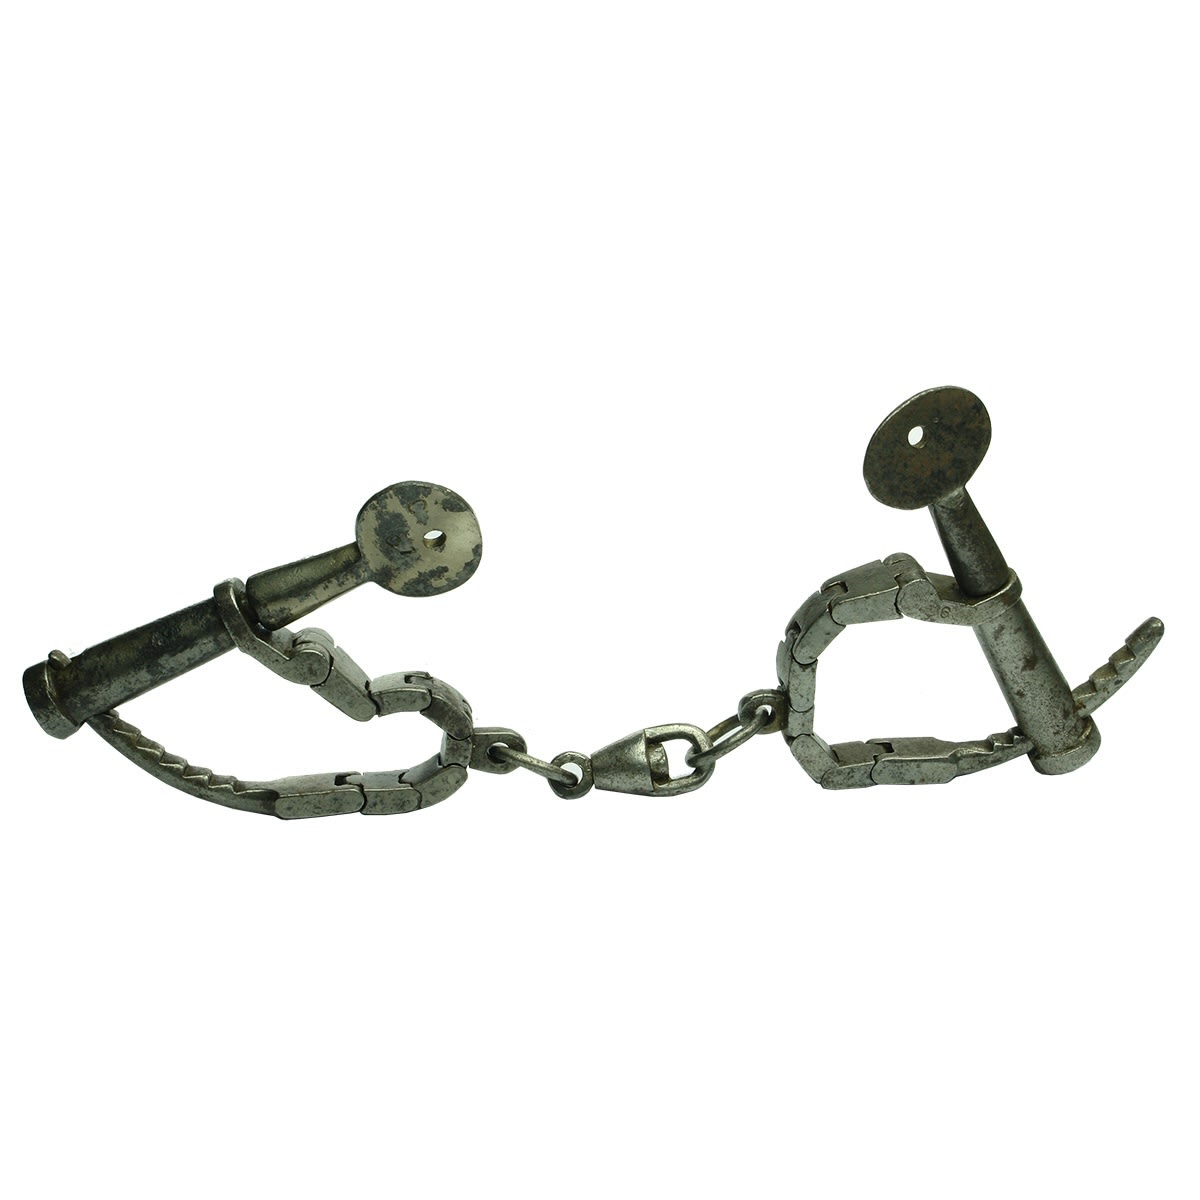 Pair of Chain link handcuffs.